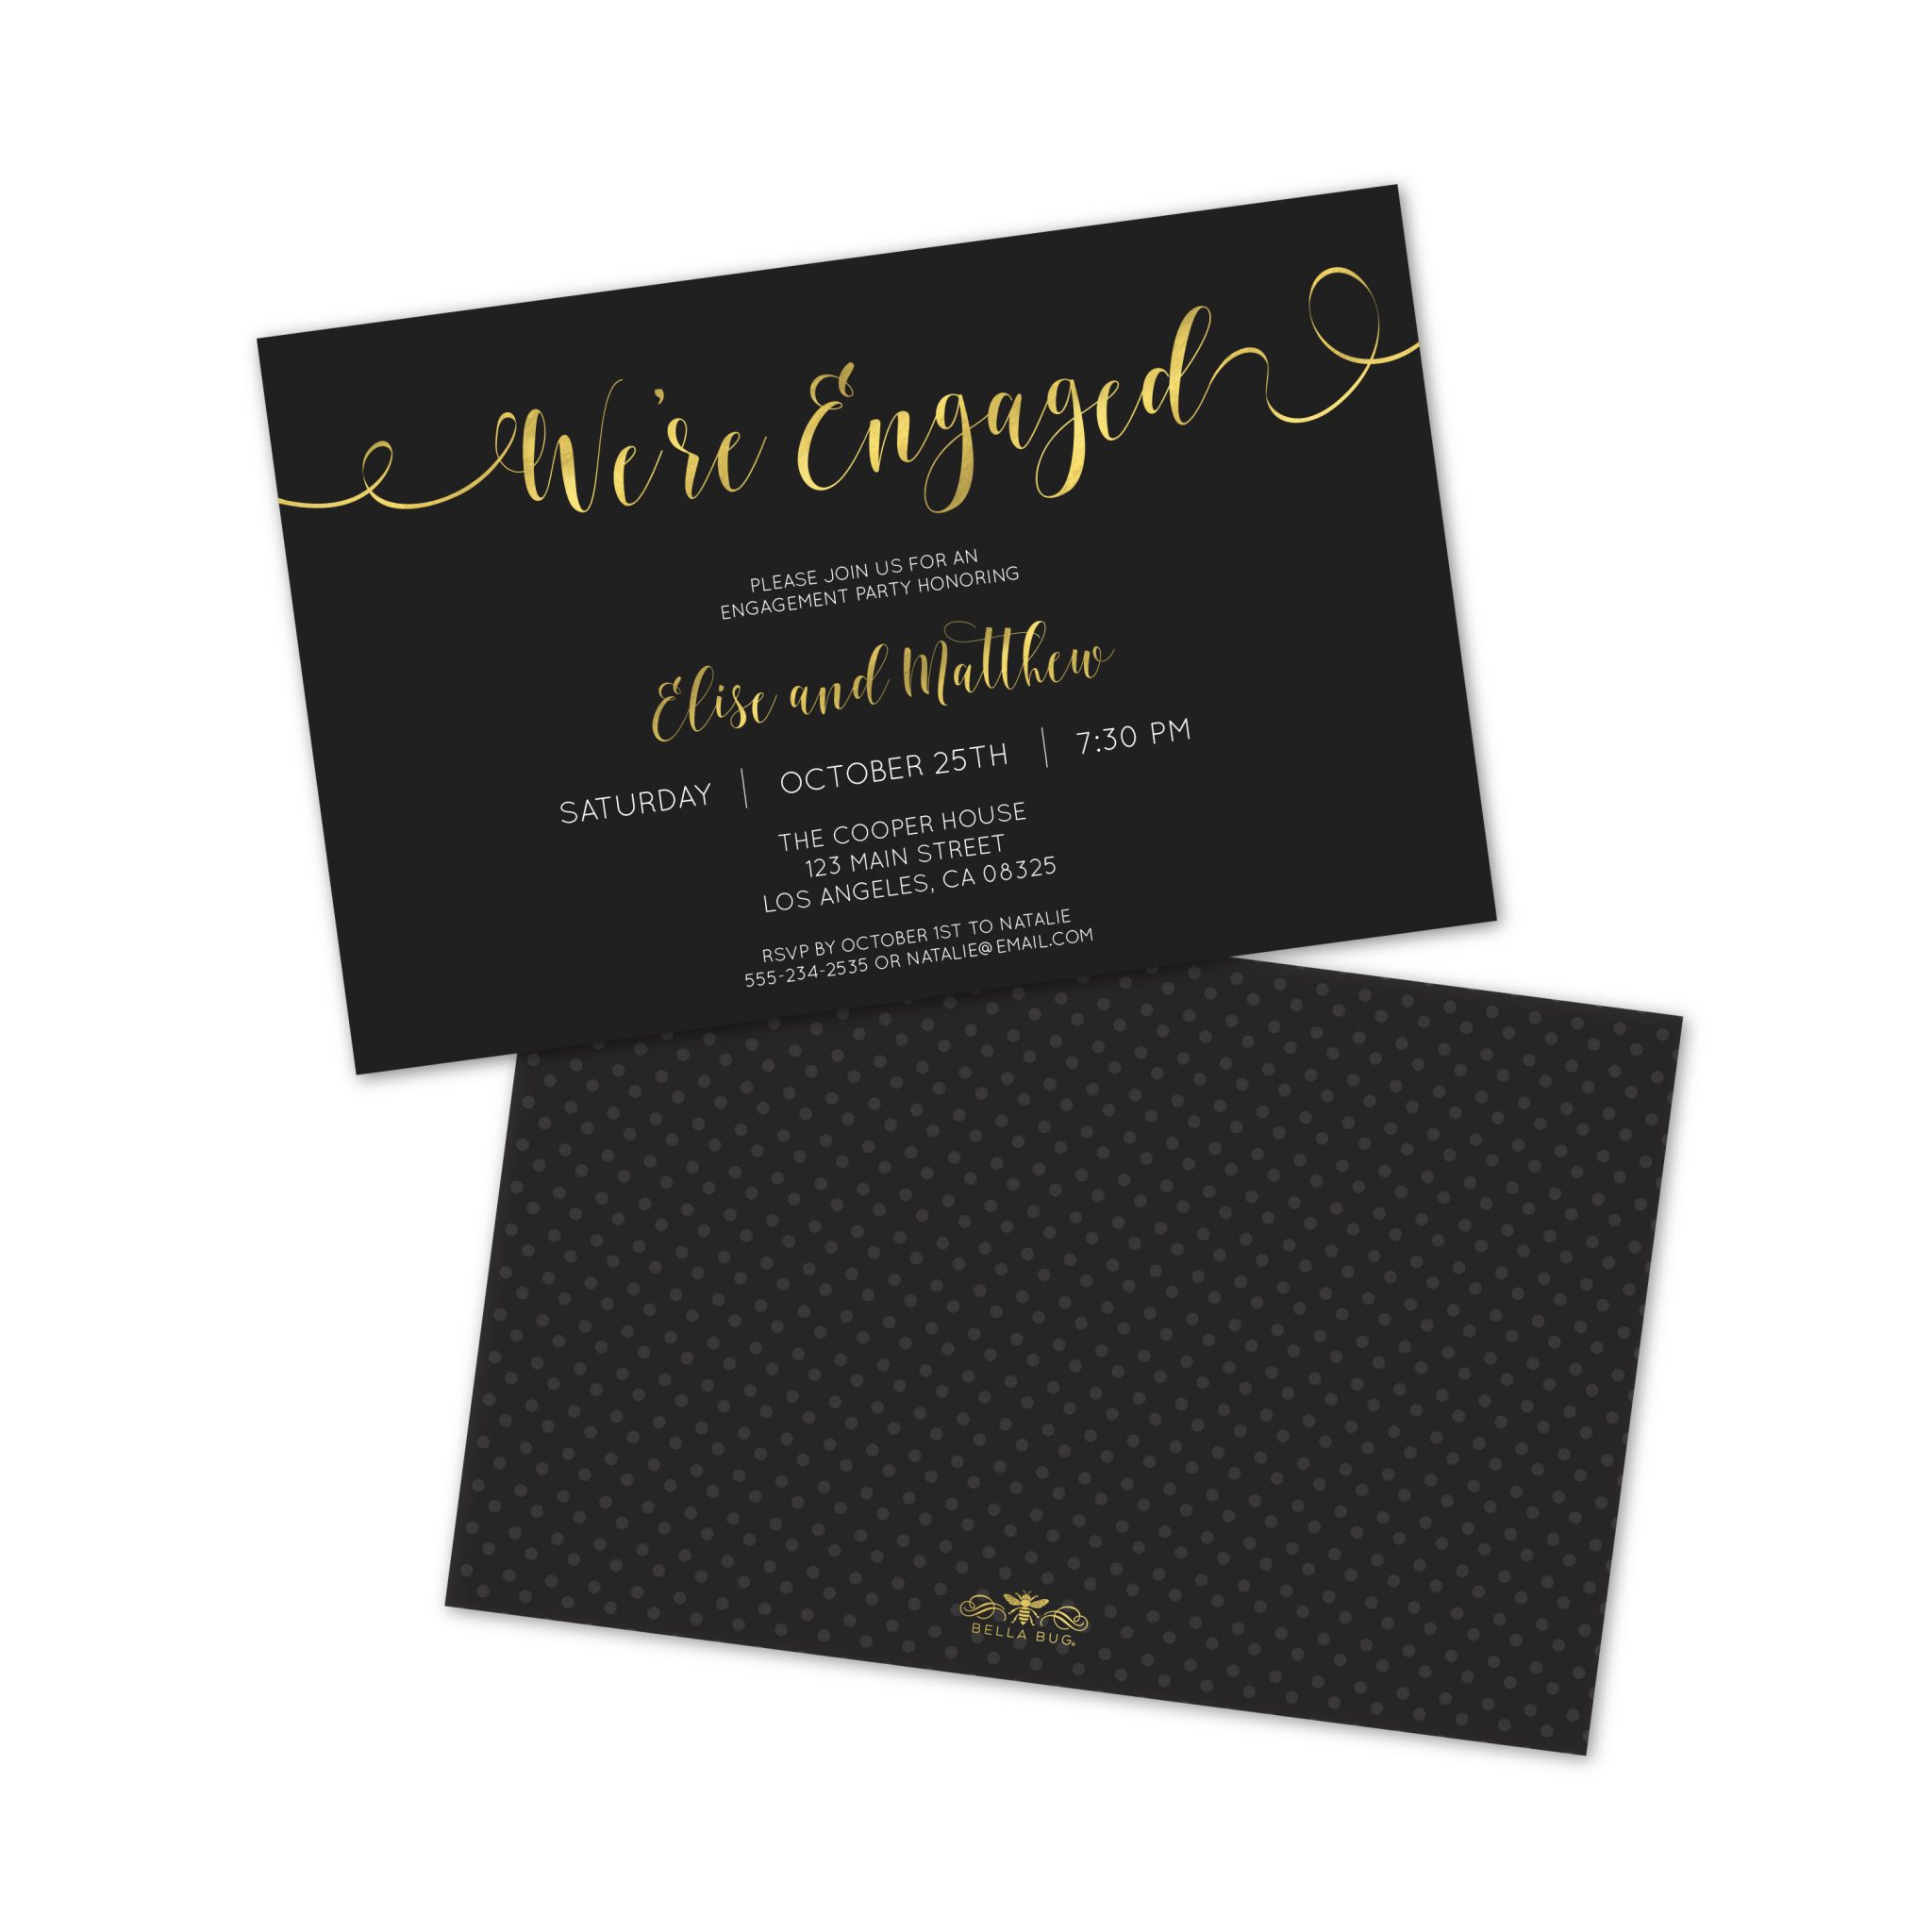 Personalised Engagement Invitations • Engagement Party Invites With Envelopes •